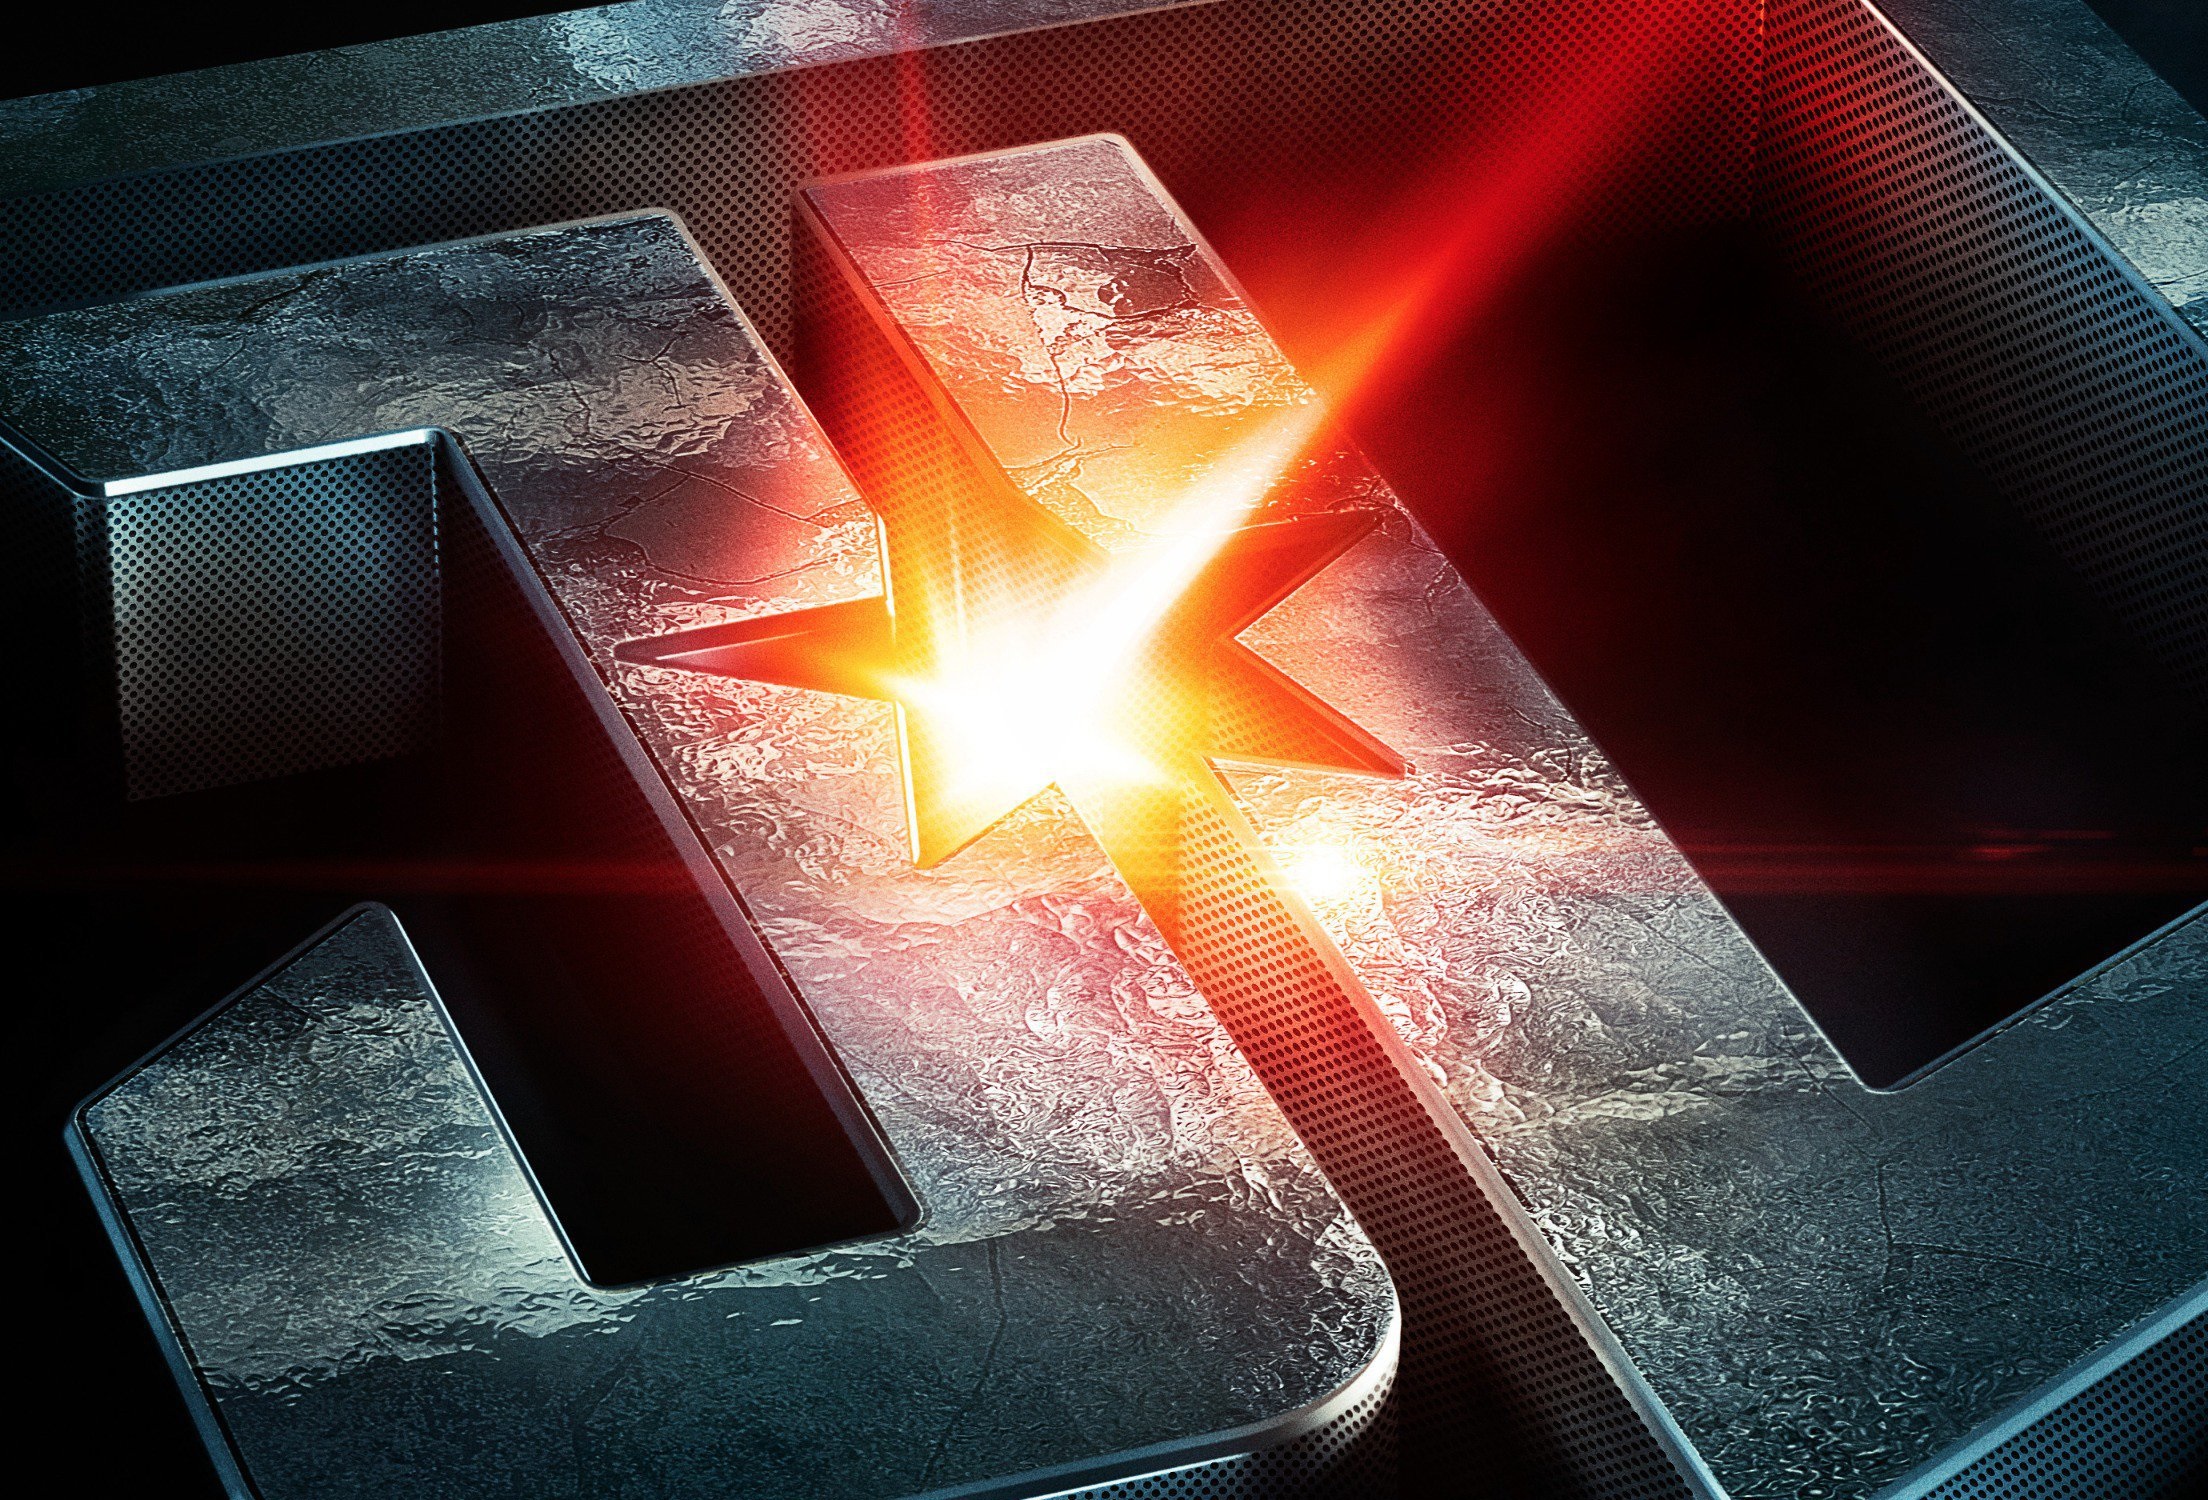 Movie Justice League HD Wallpaper | Background Image